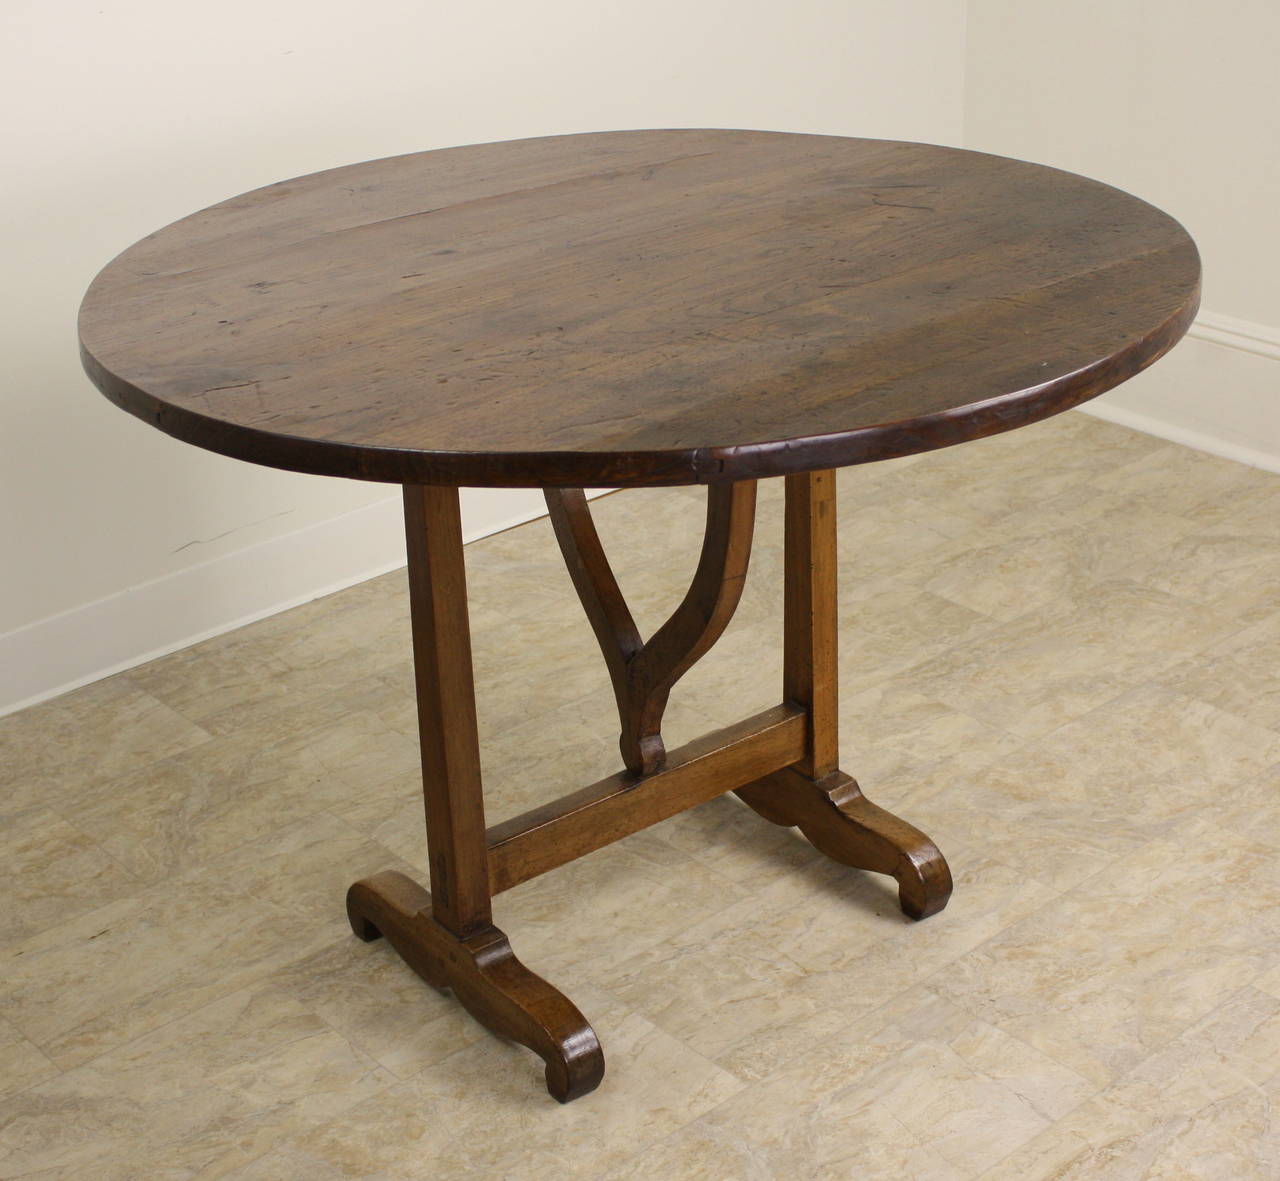 This is a great-looking French wine tasting table. Beautiful color and patina, and a nice thick top.  Because there is no apron, the round breakfast dining table is quite comfortable for knees. Easy for six to sit, with smaller-sized chairs. Strong